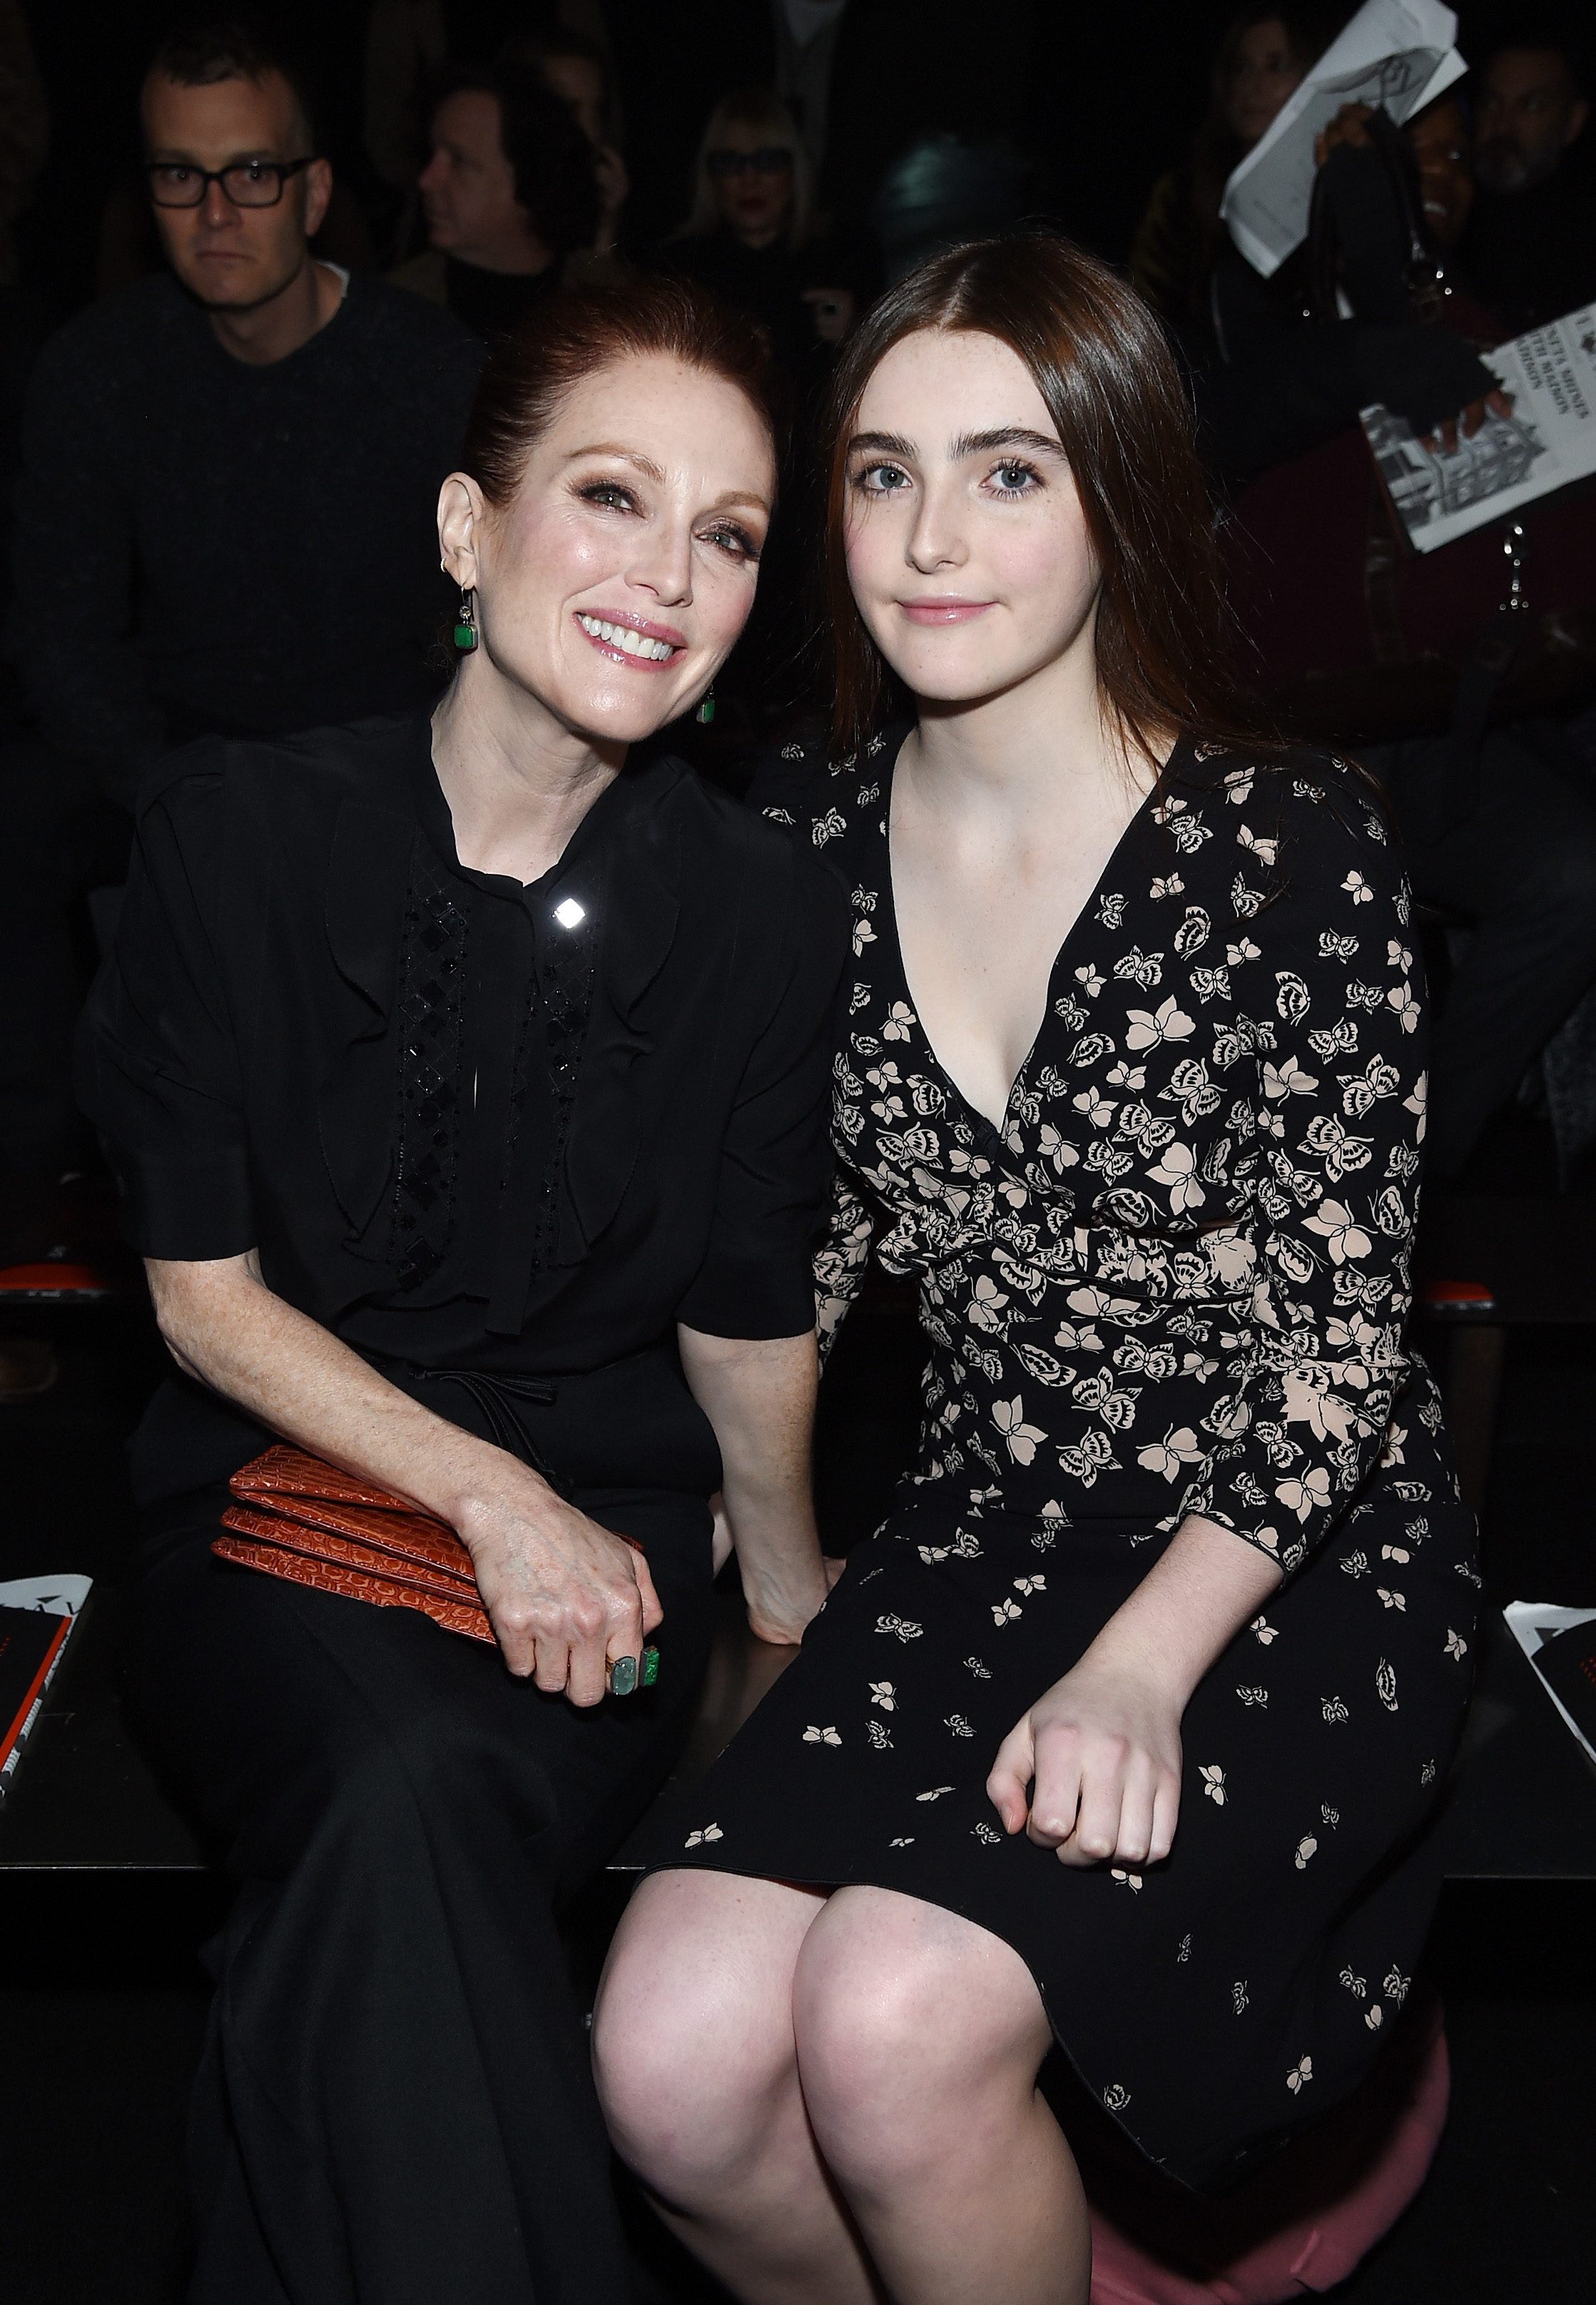 Julianne and daughter Liv posed together for a photo back in February 2018